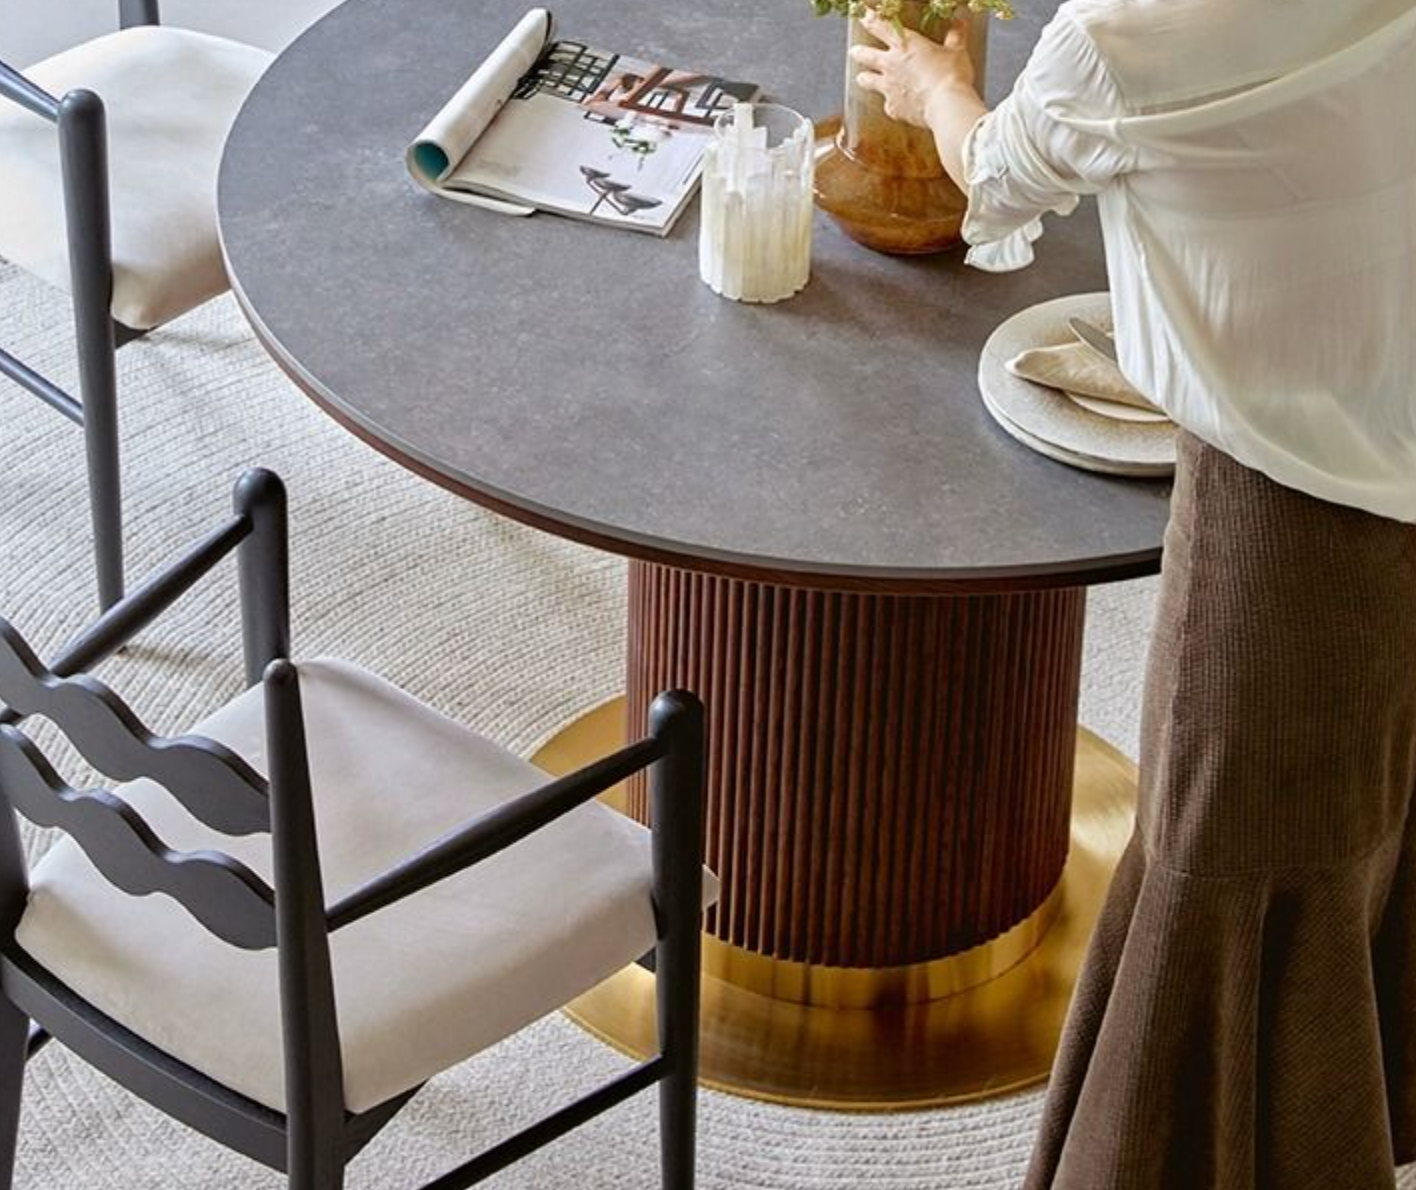 Bek Round Dining Table, Brown｜ DC Concept